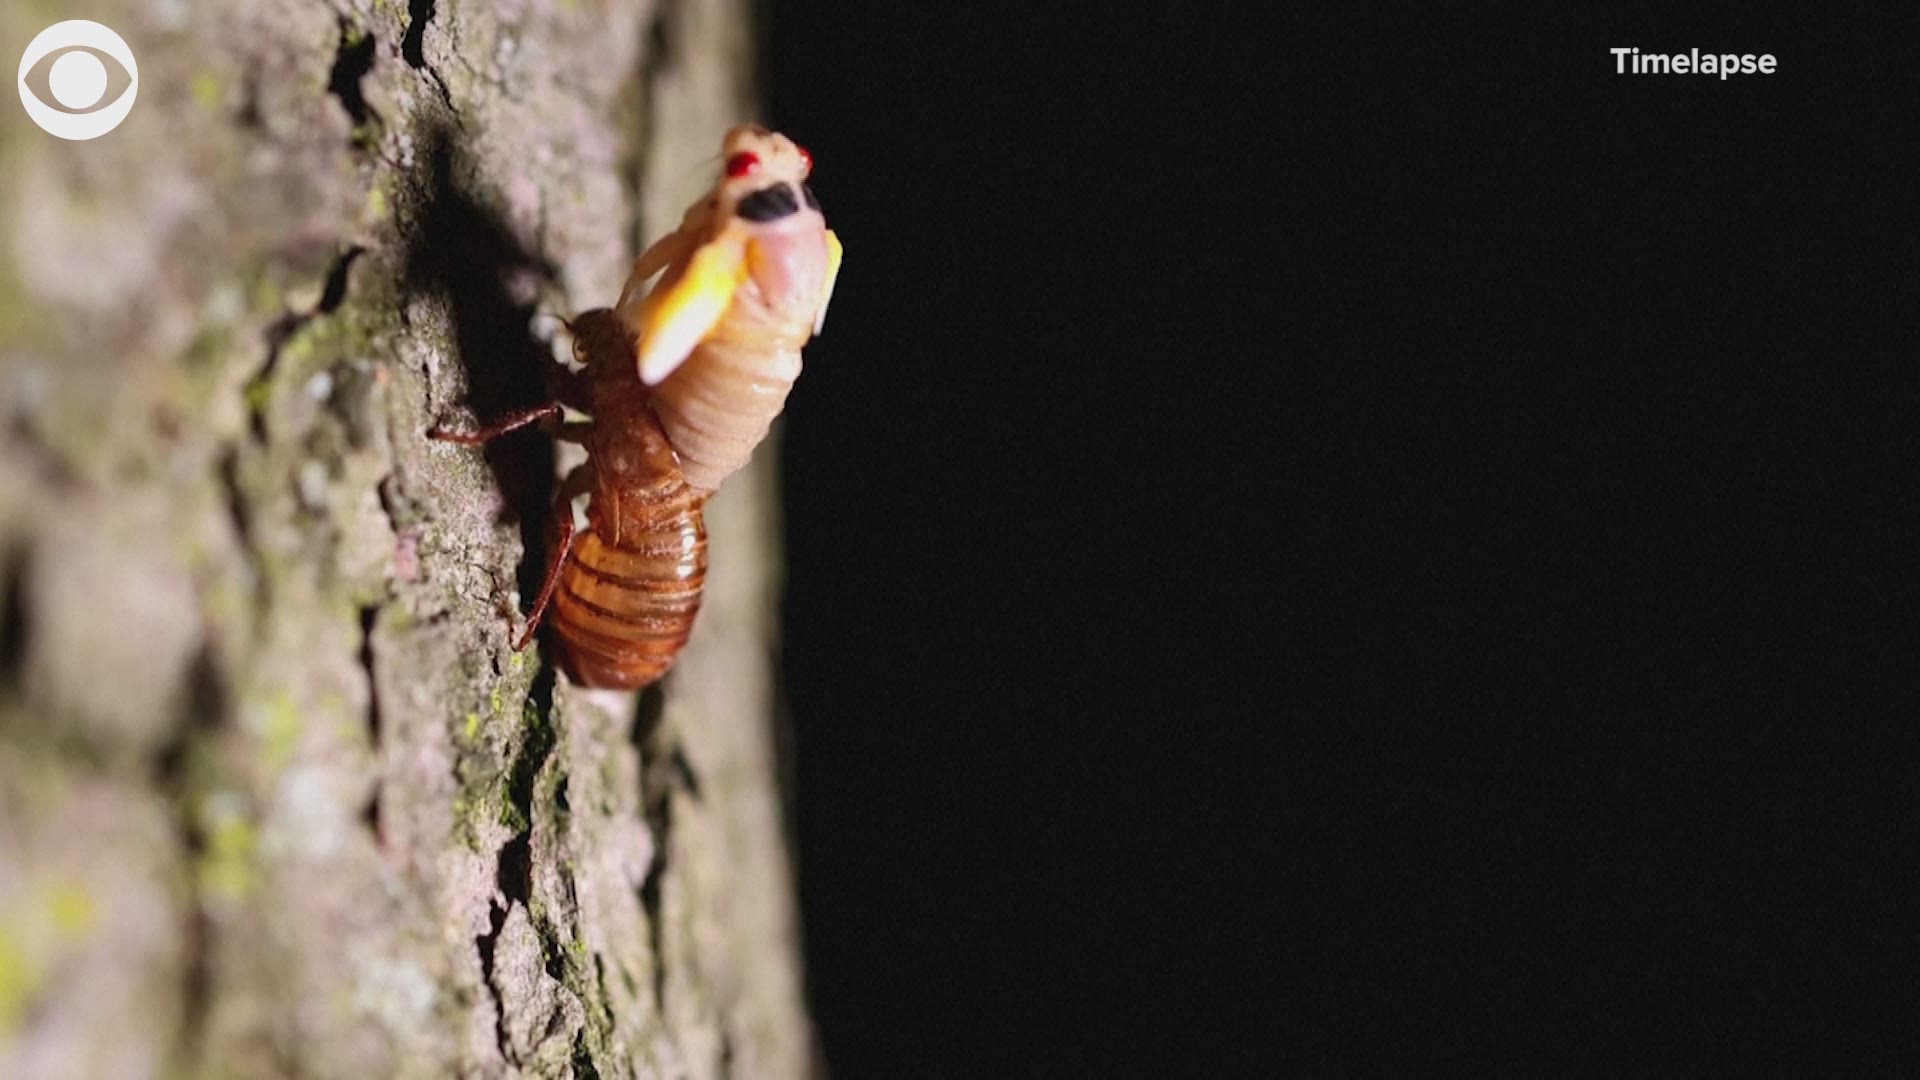 Billions of cicadas are expected to emerge in parts of the U.S. after 17 years underground.